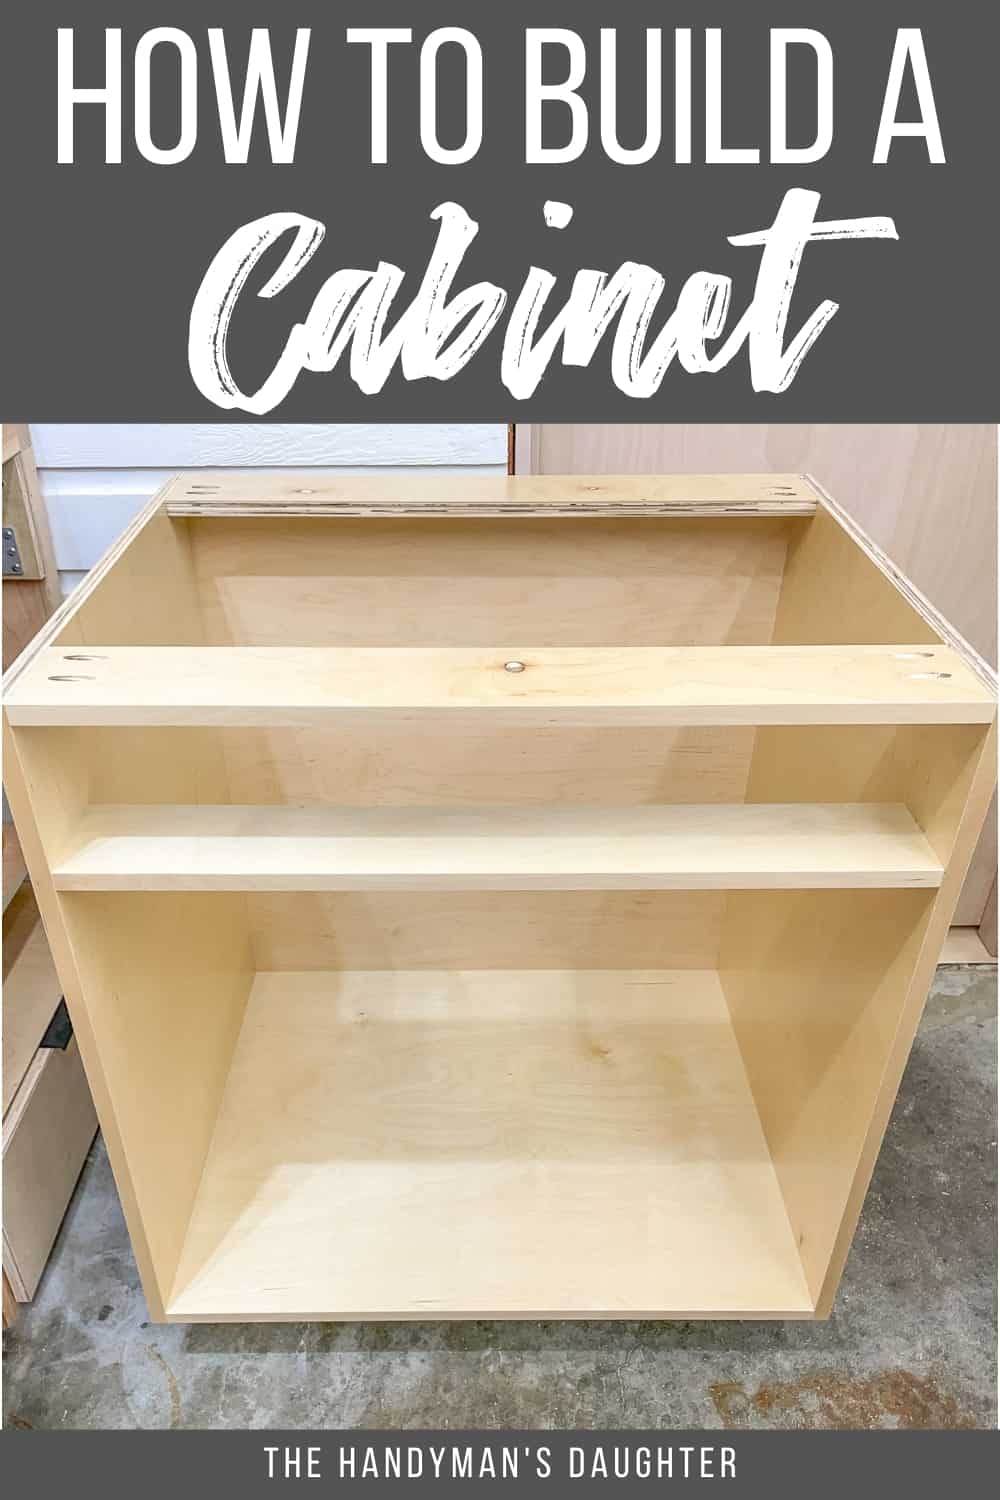 https://www.thehandymansdaughter.com/wp-content/uploads/2021/09/How-to-build-a-Cabinet-Pin-1.jpg